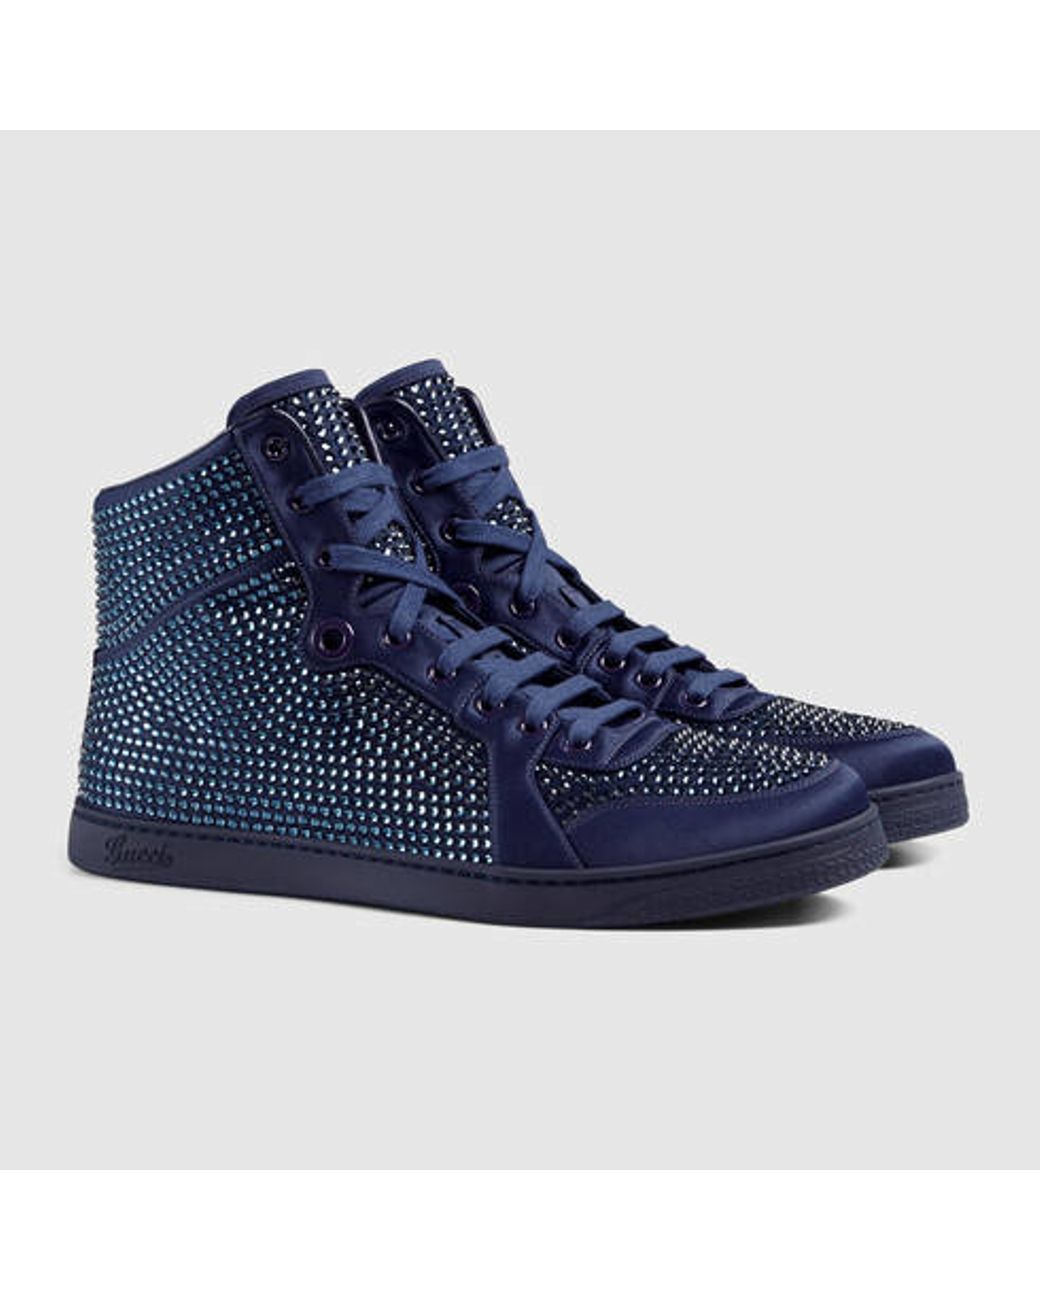 Gucci High-top Sneaker With Crystal Studs in Dark Blue (Blue) for Men | Lyst